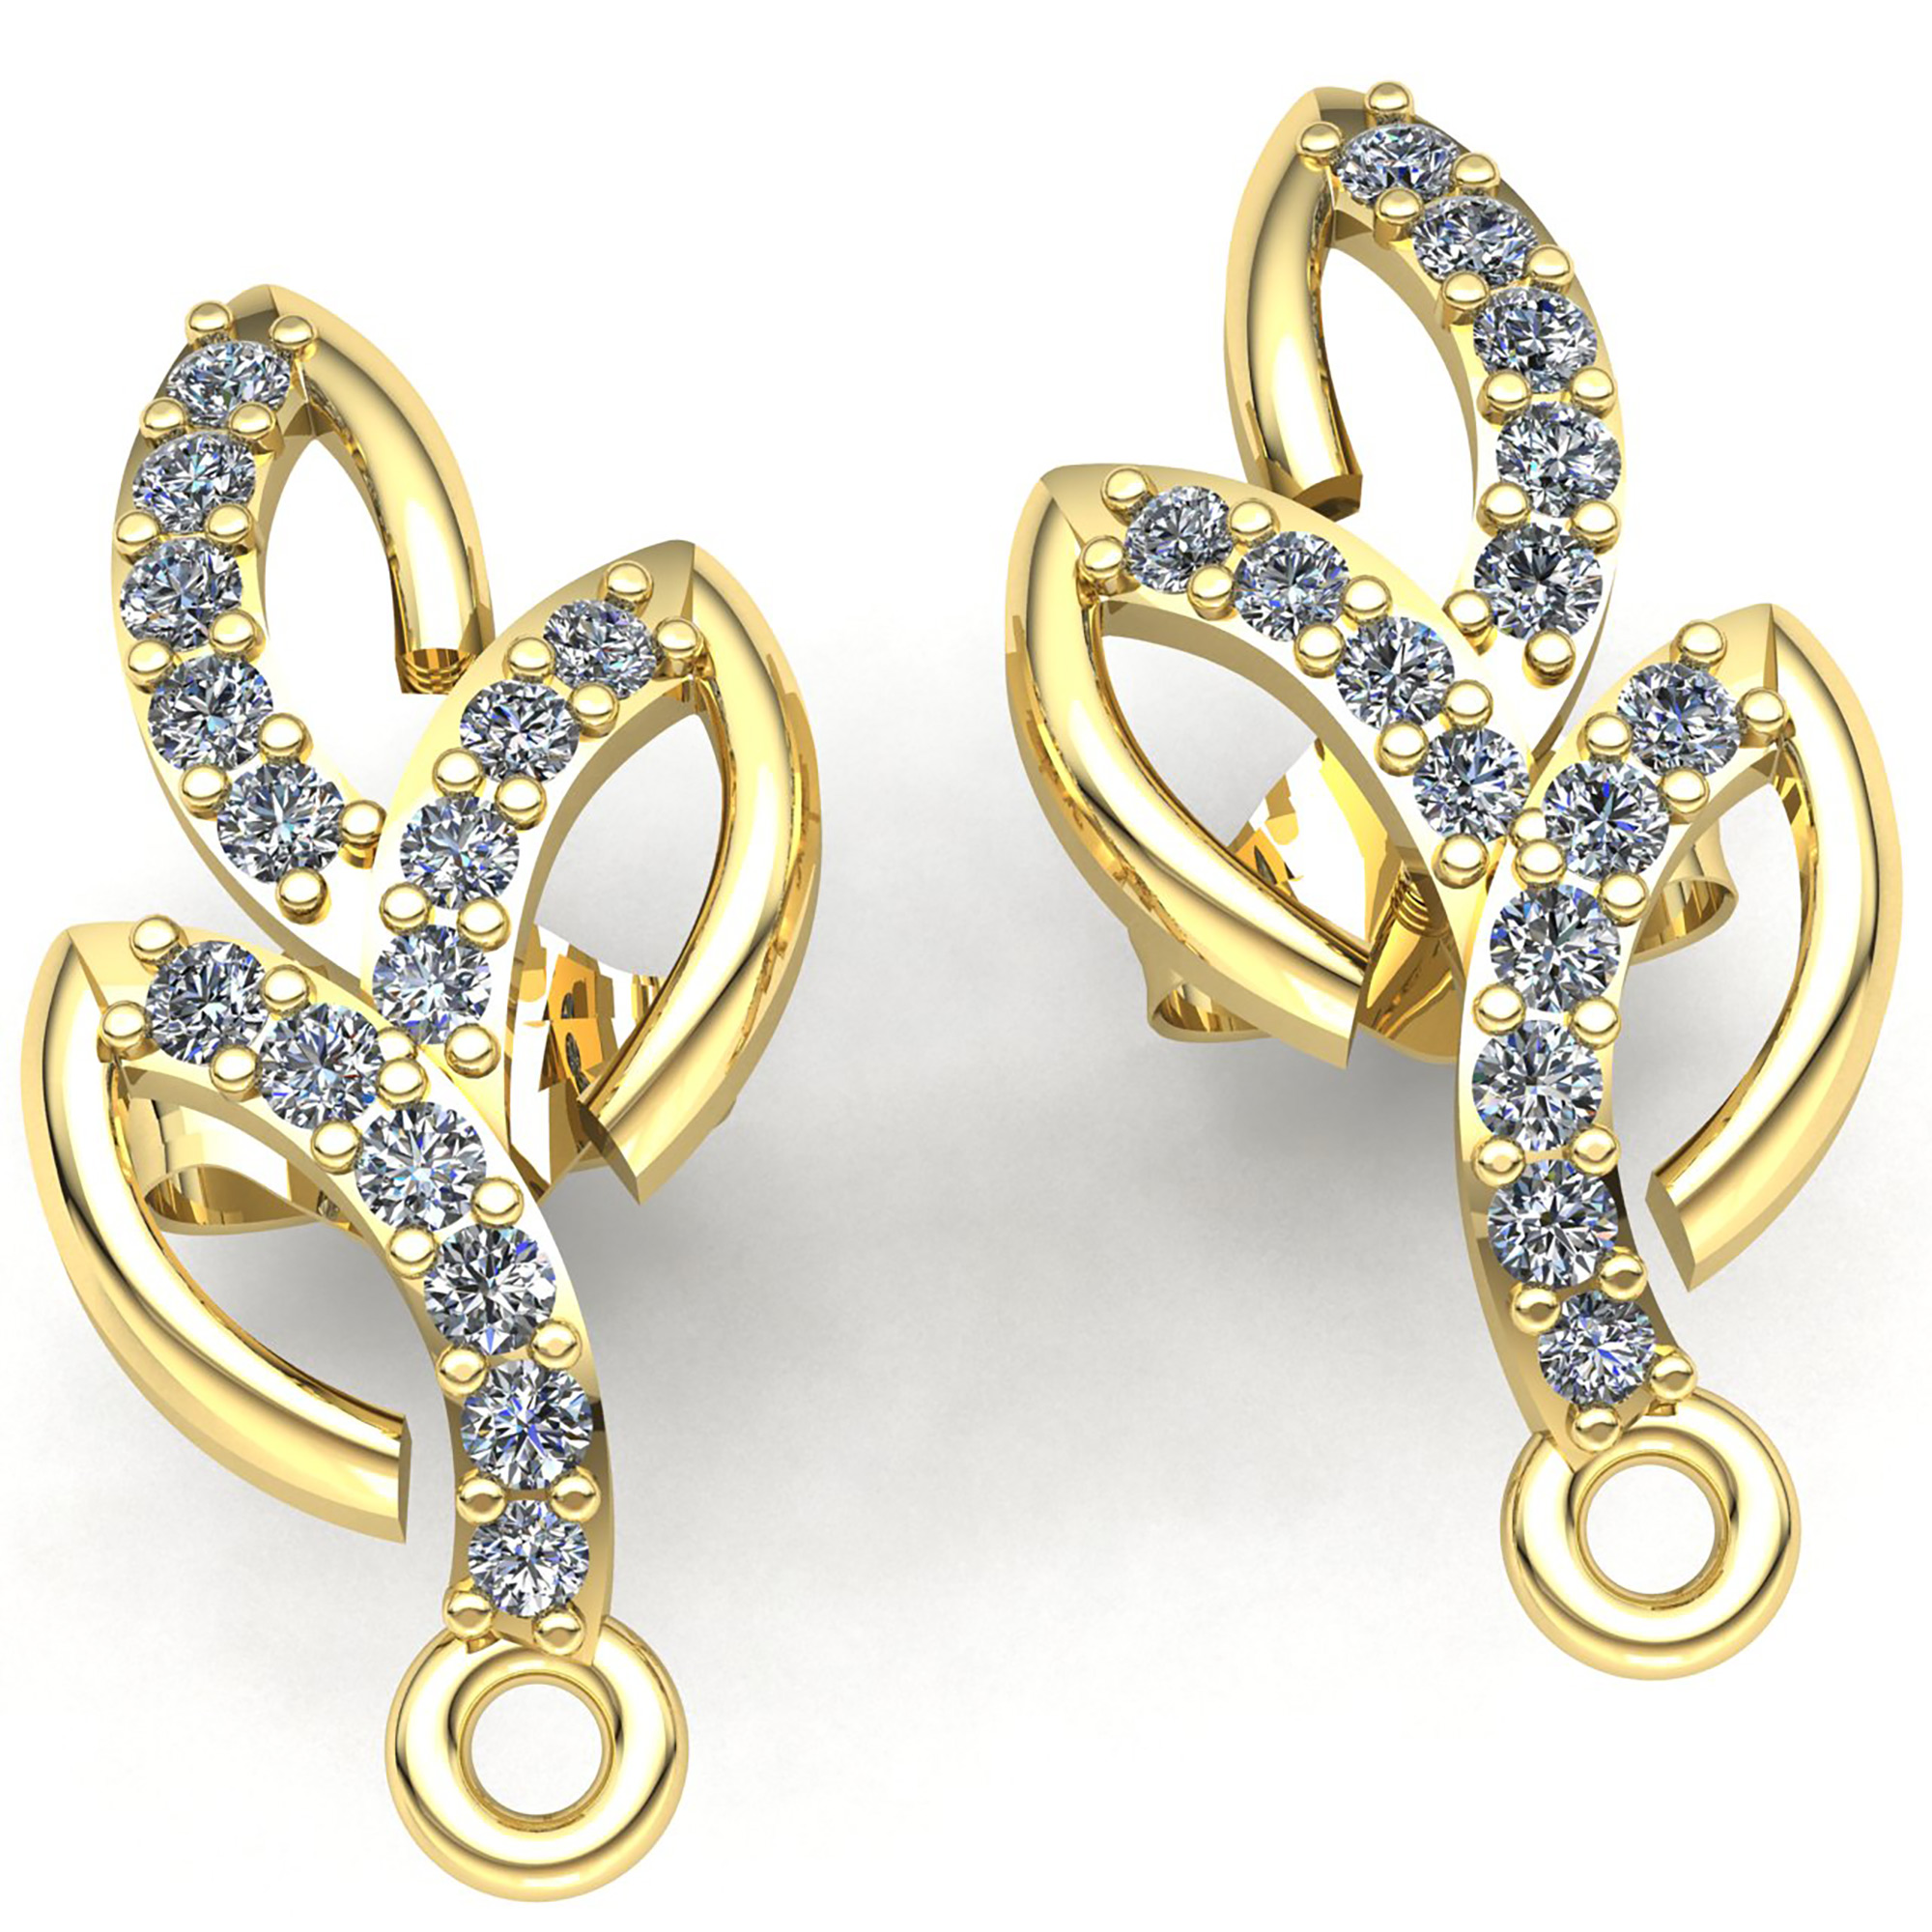 Jewel We Sell Genuine 2ct Round Cut Diamond Women's Fancy Earrings 18K White, Yellow or Rose Gold H SI2